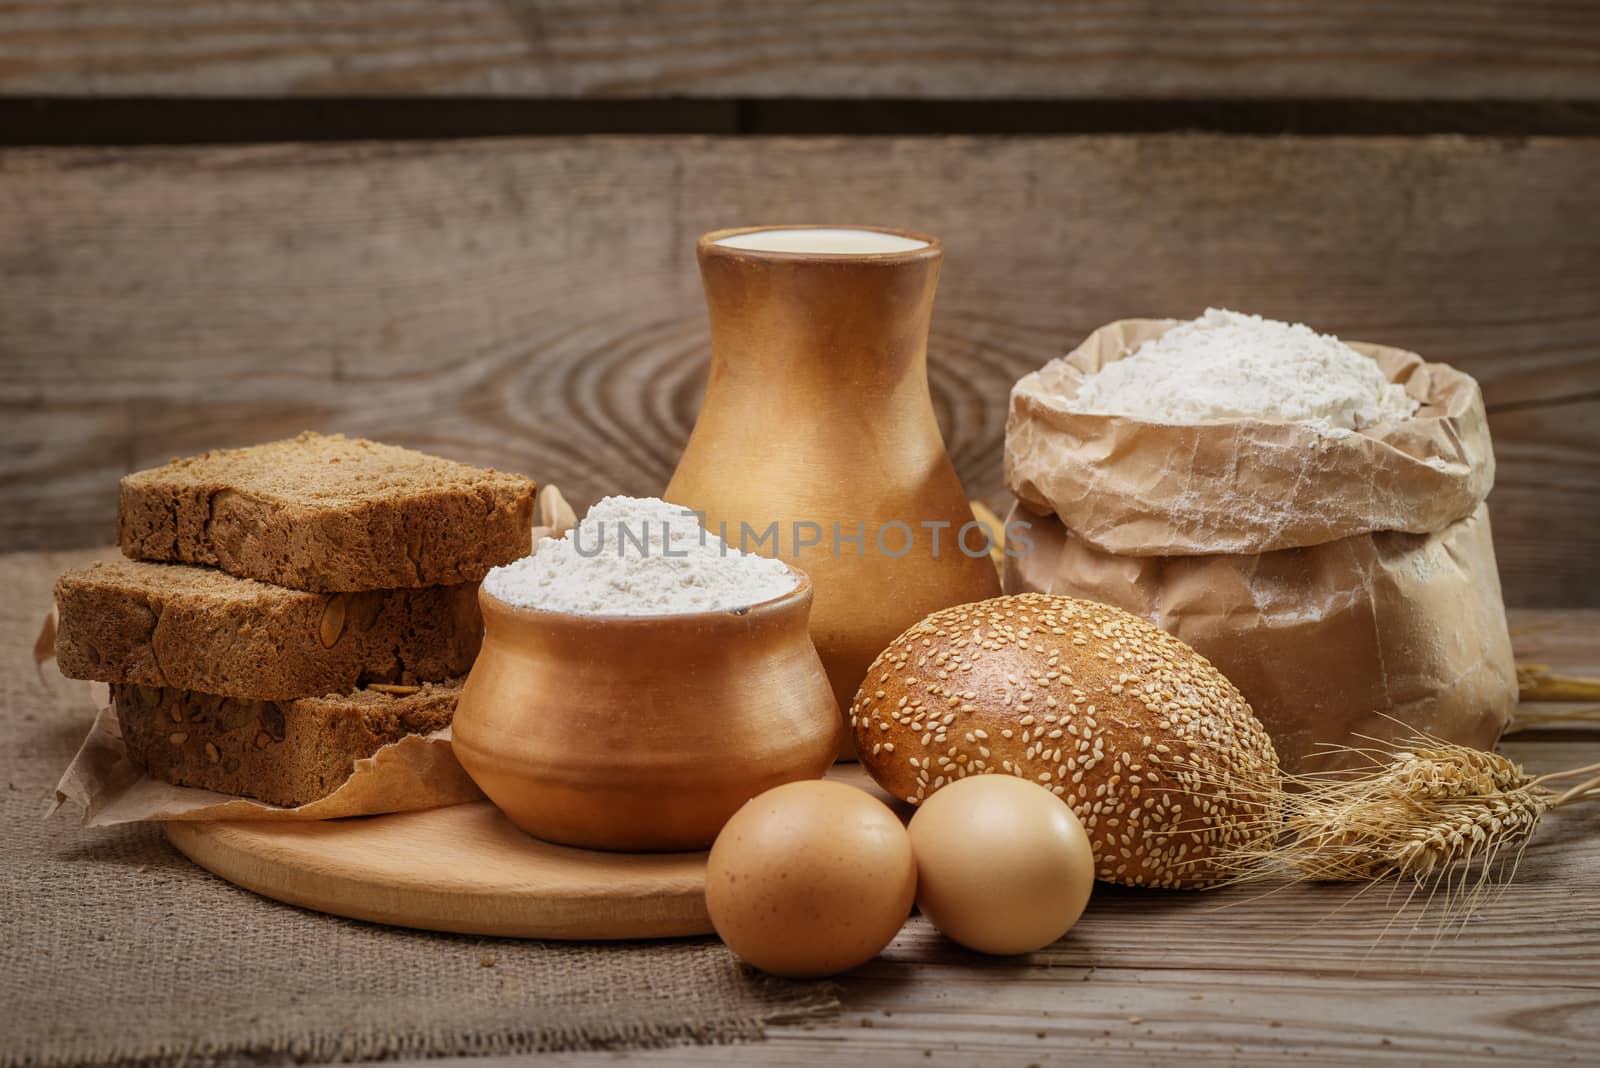 Ingredients for baking bread and pastry by iprachenko